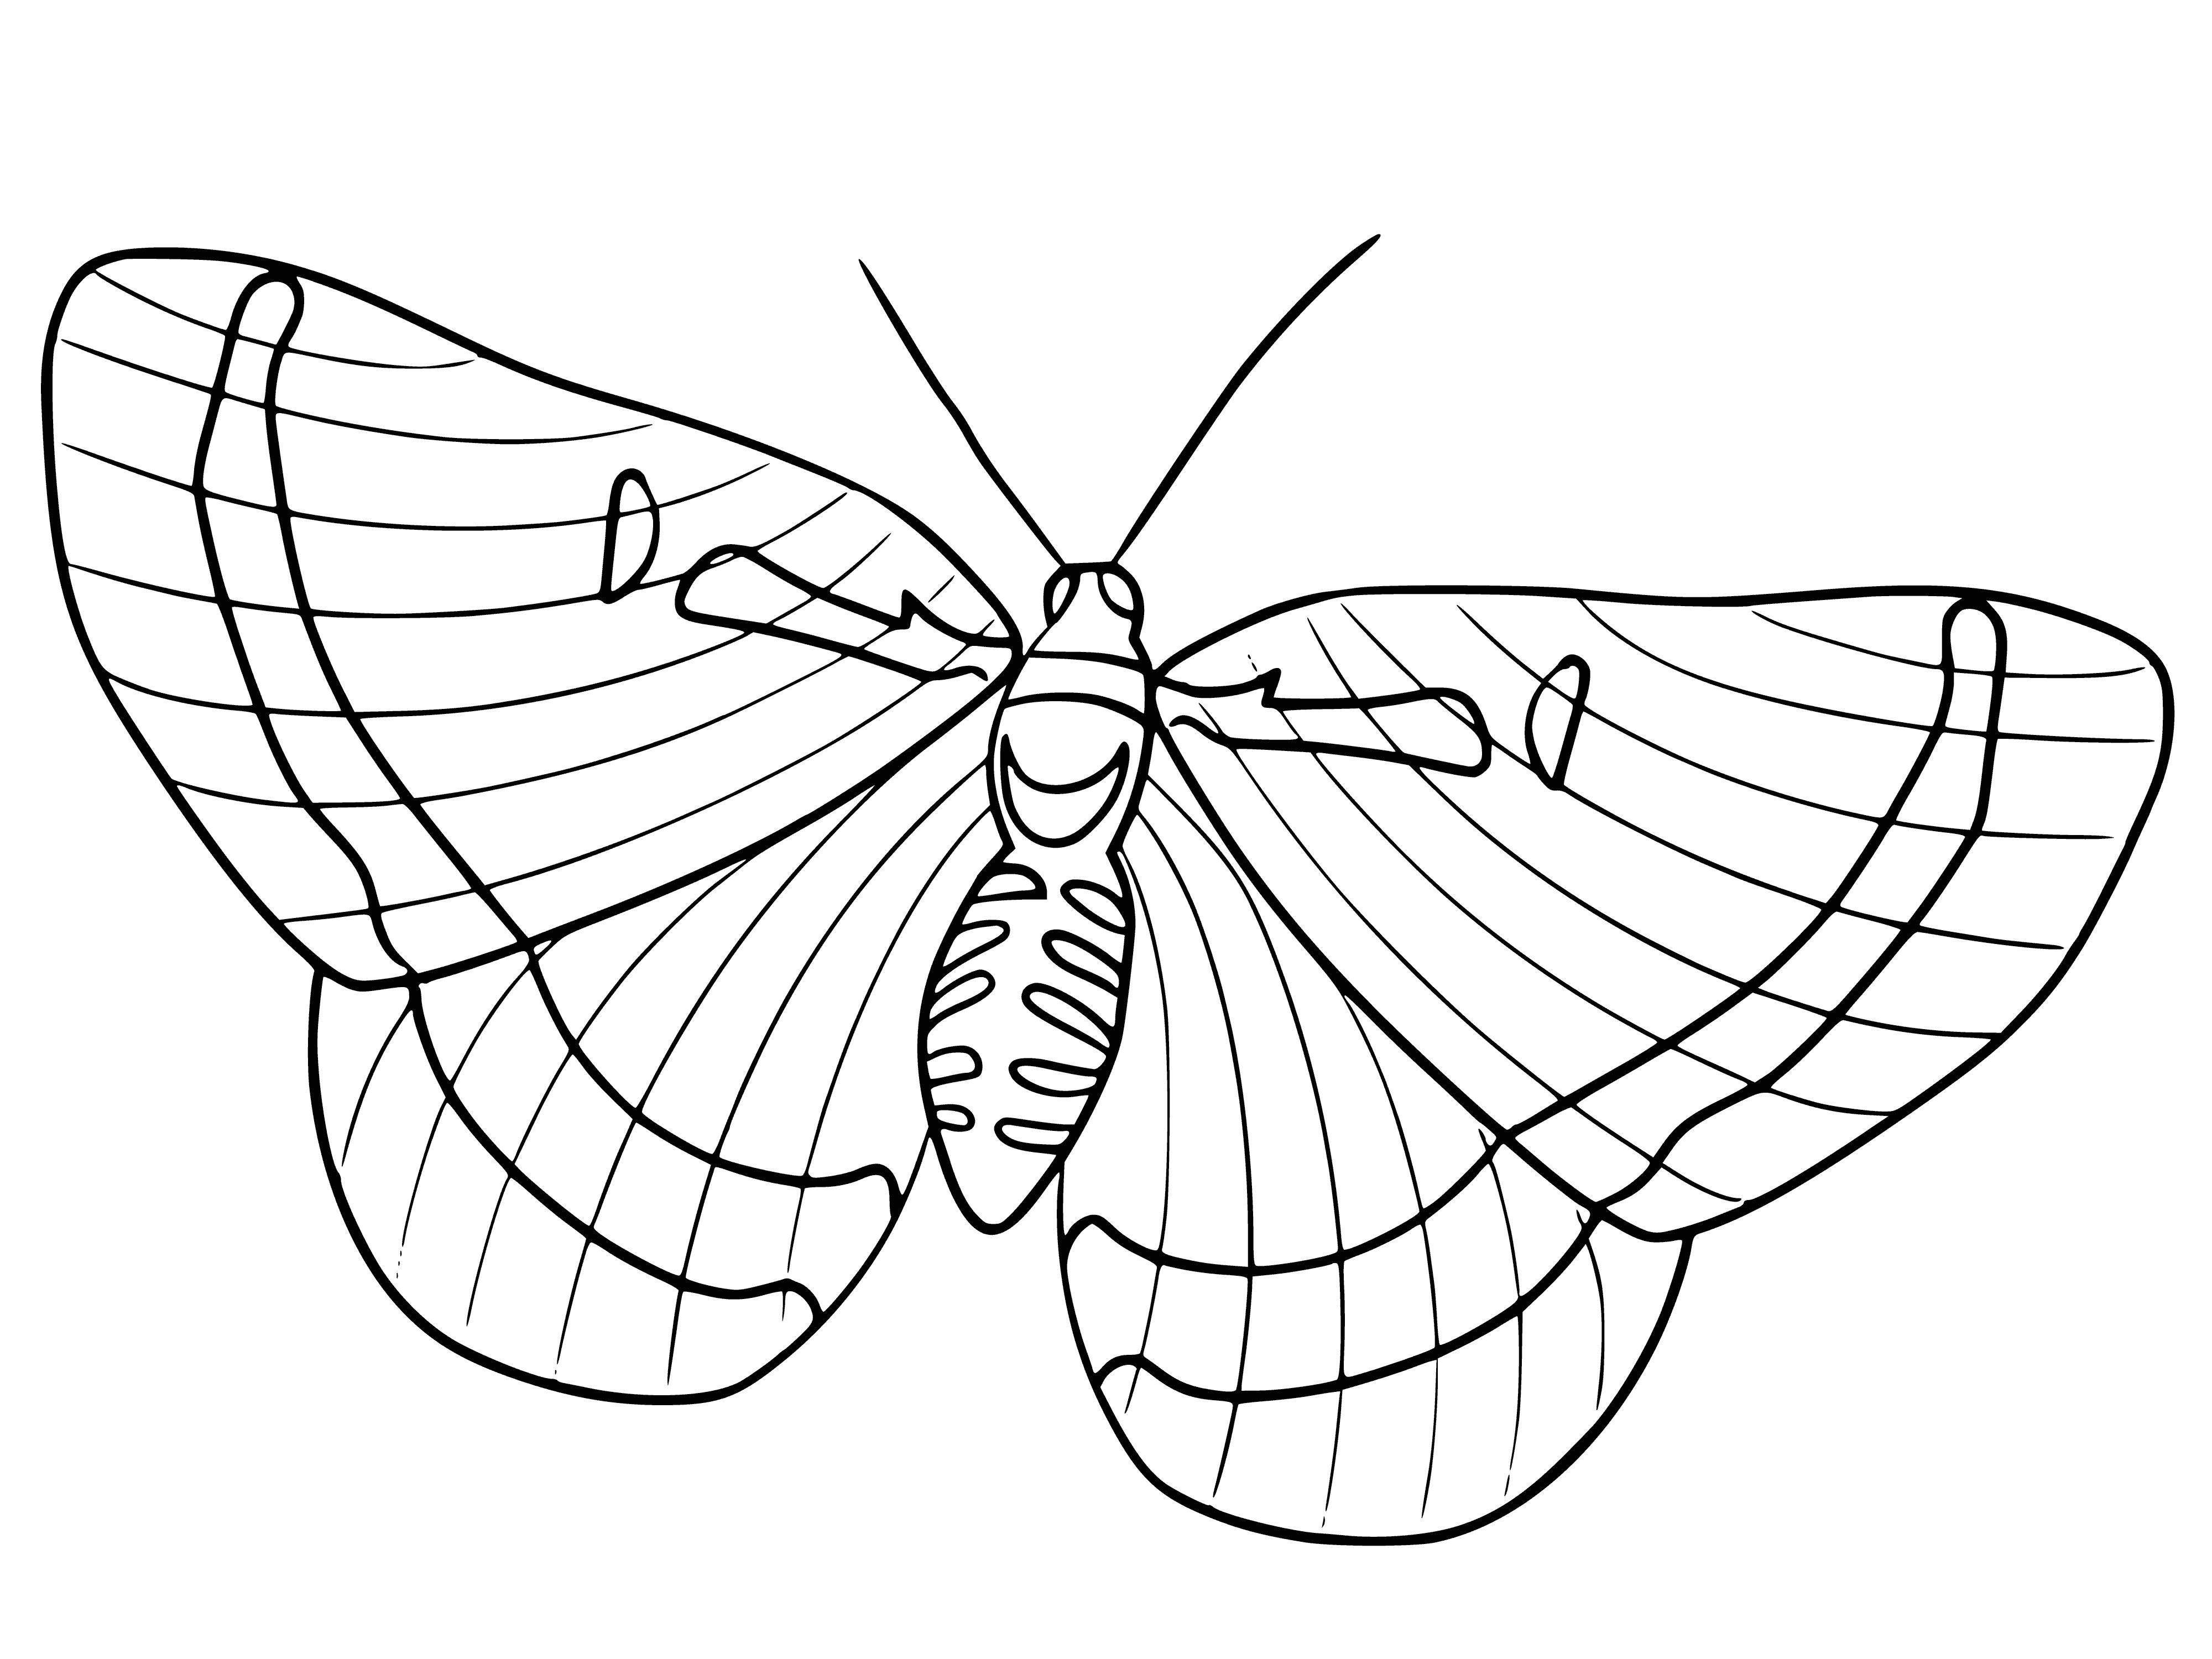 coloring page: Butterfly flaps near purple flowers, its wings outstretched in a mixture of yellow and black.